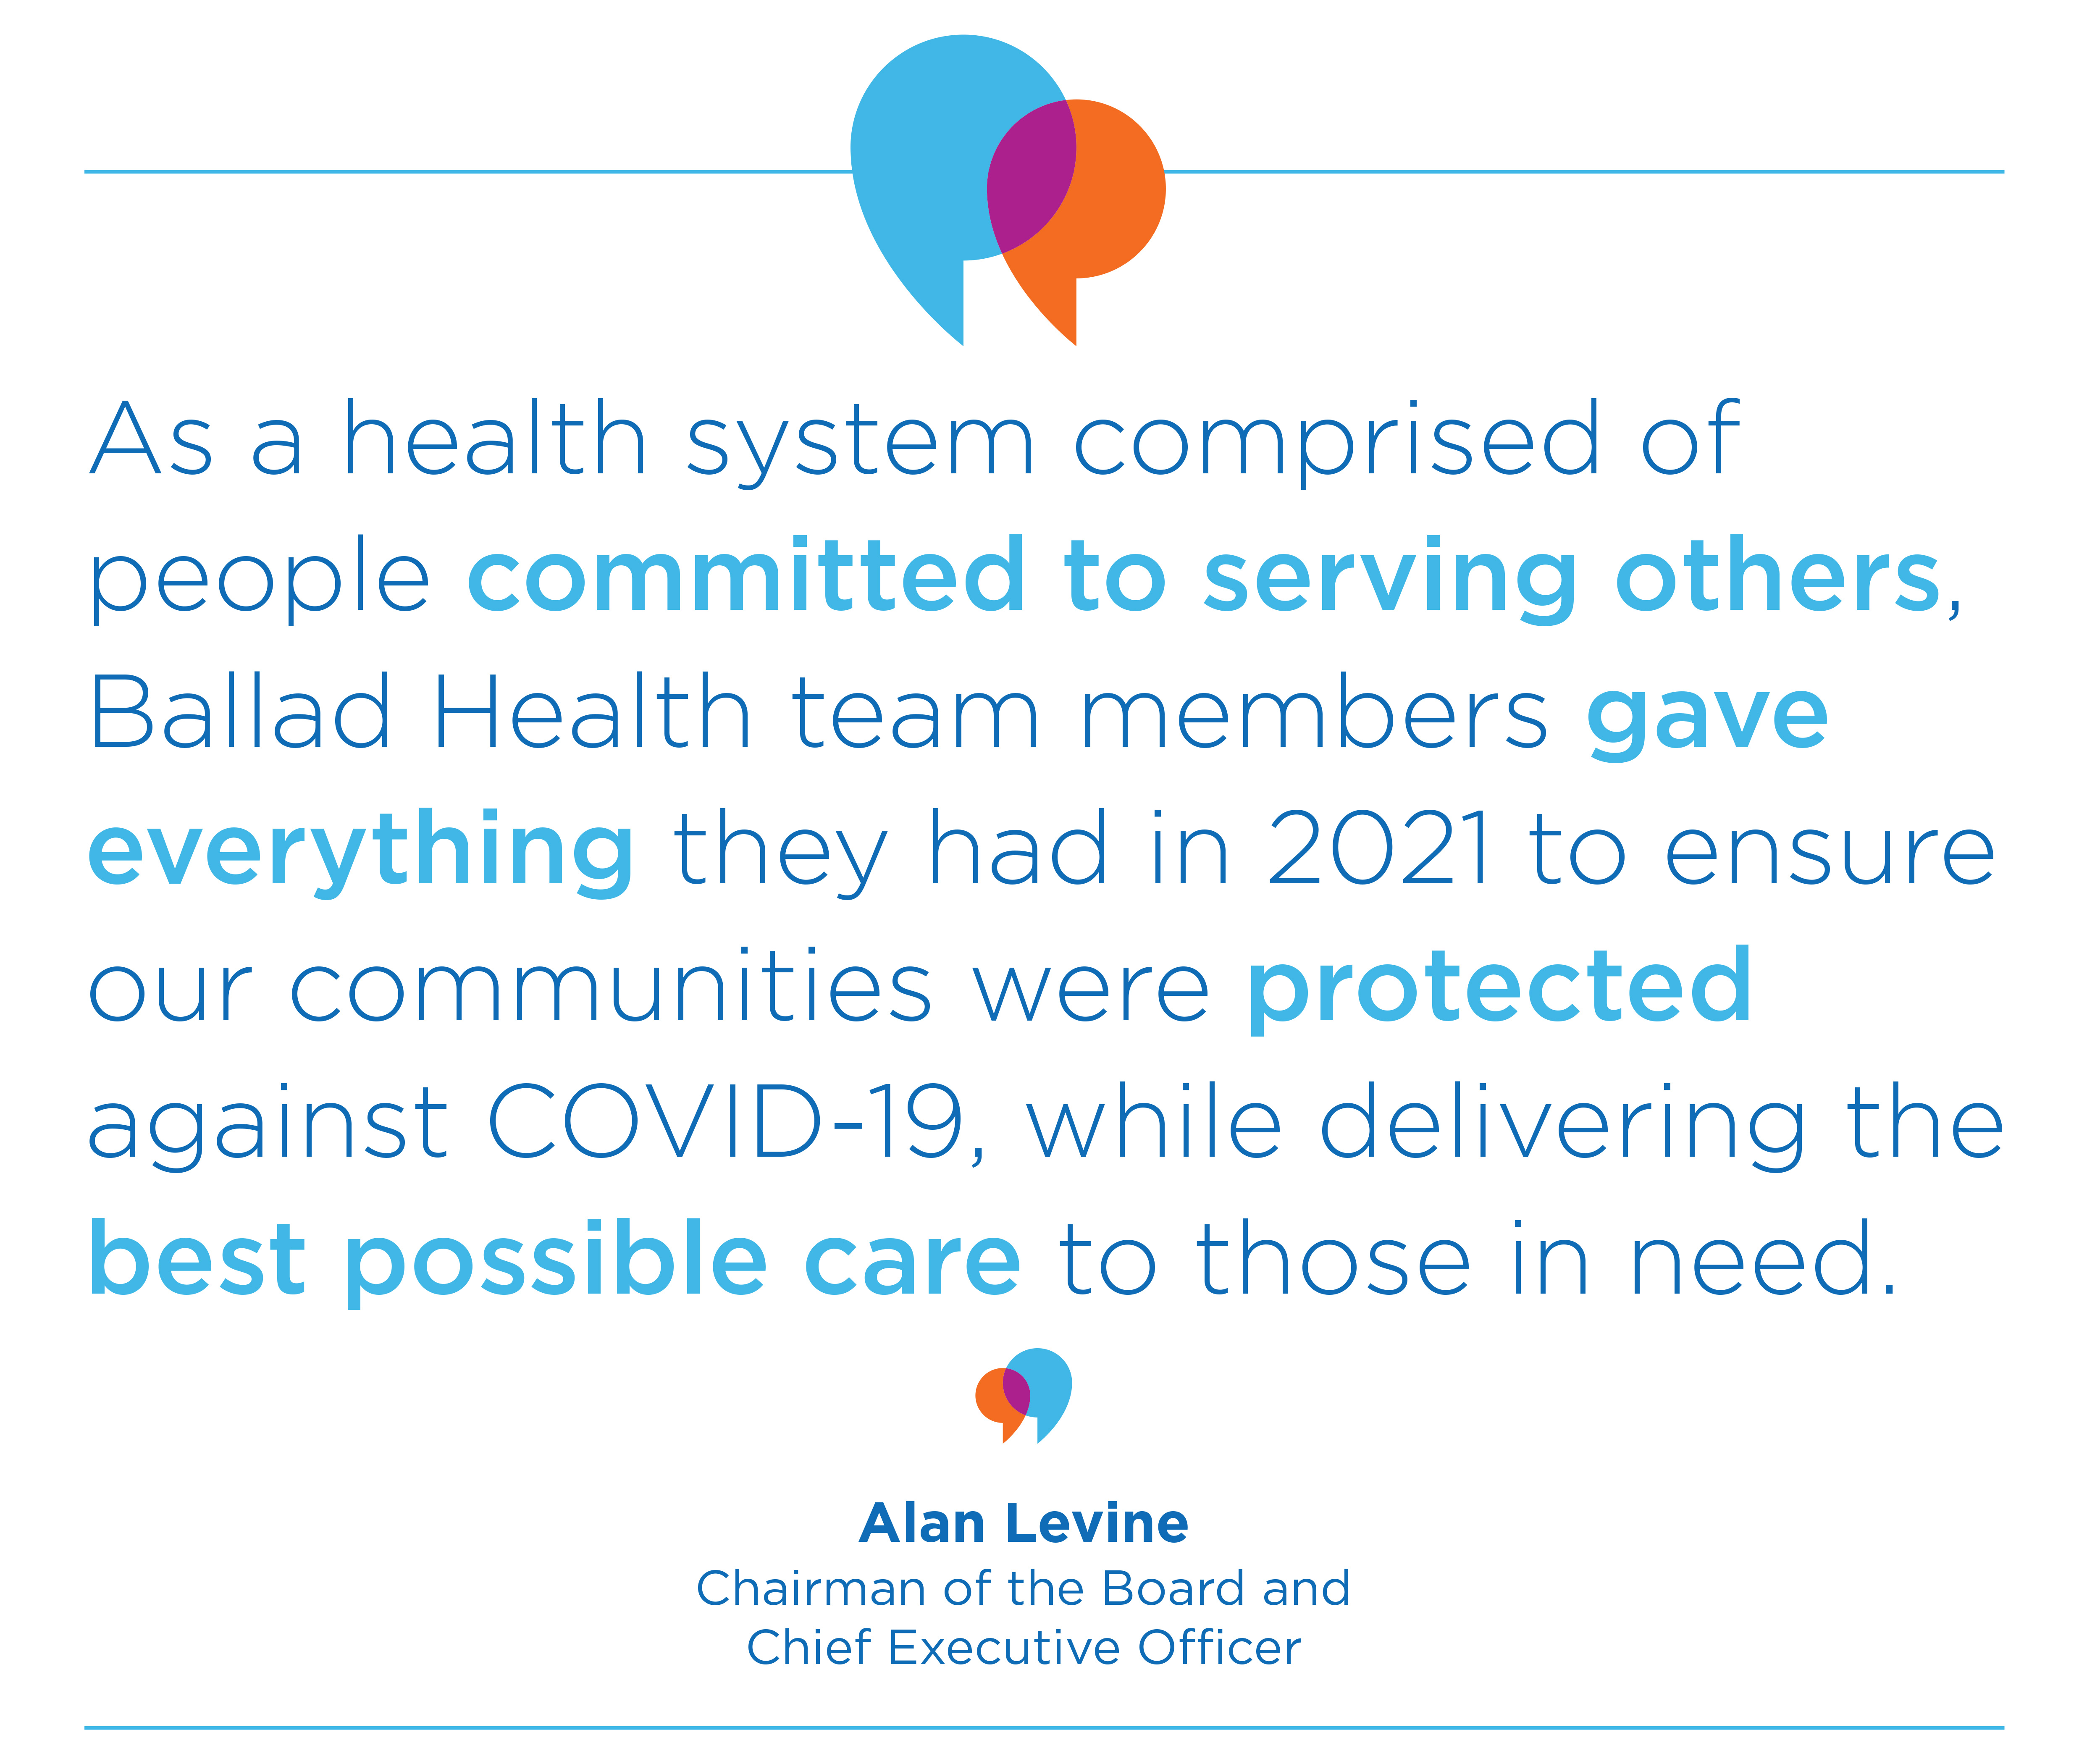 Quote: "As a health system comprised of people committed to serving others, Ballad Health team members gave everything they had in 2021 to ensure our communities were protected against COVID-19, while delivering the best possible care to those in need." Alan Levine, Chairman of the Board and Chief Executive Officer